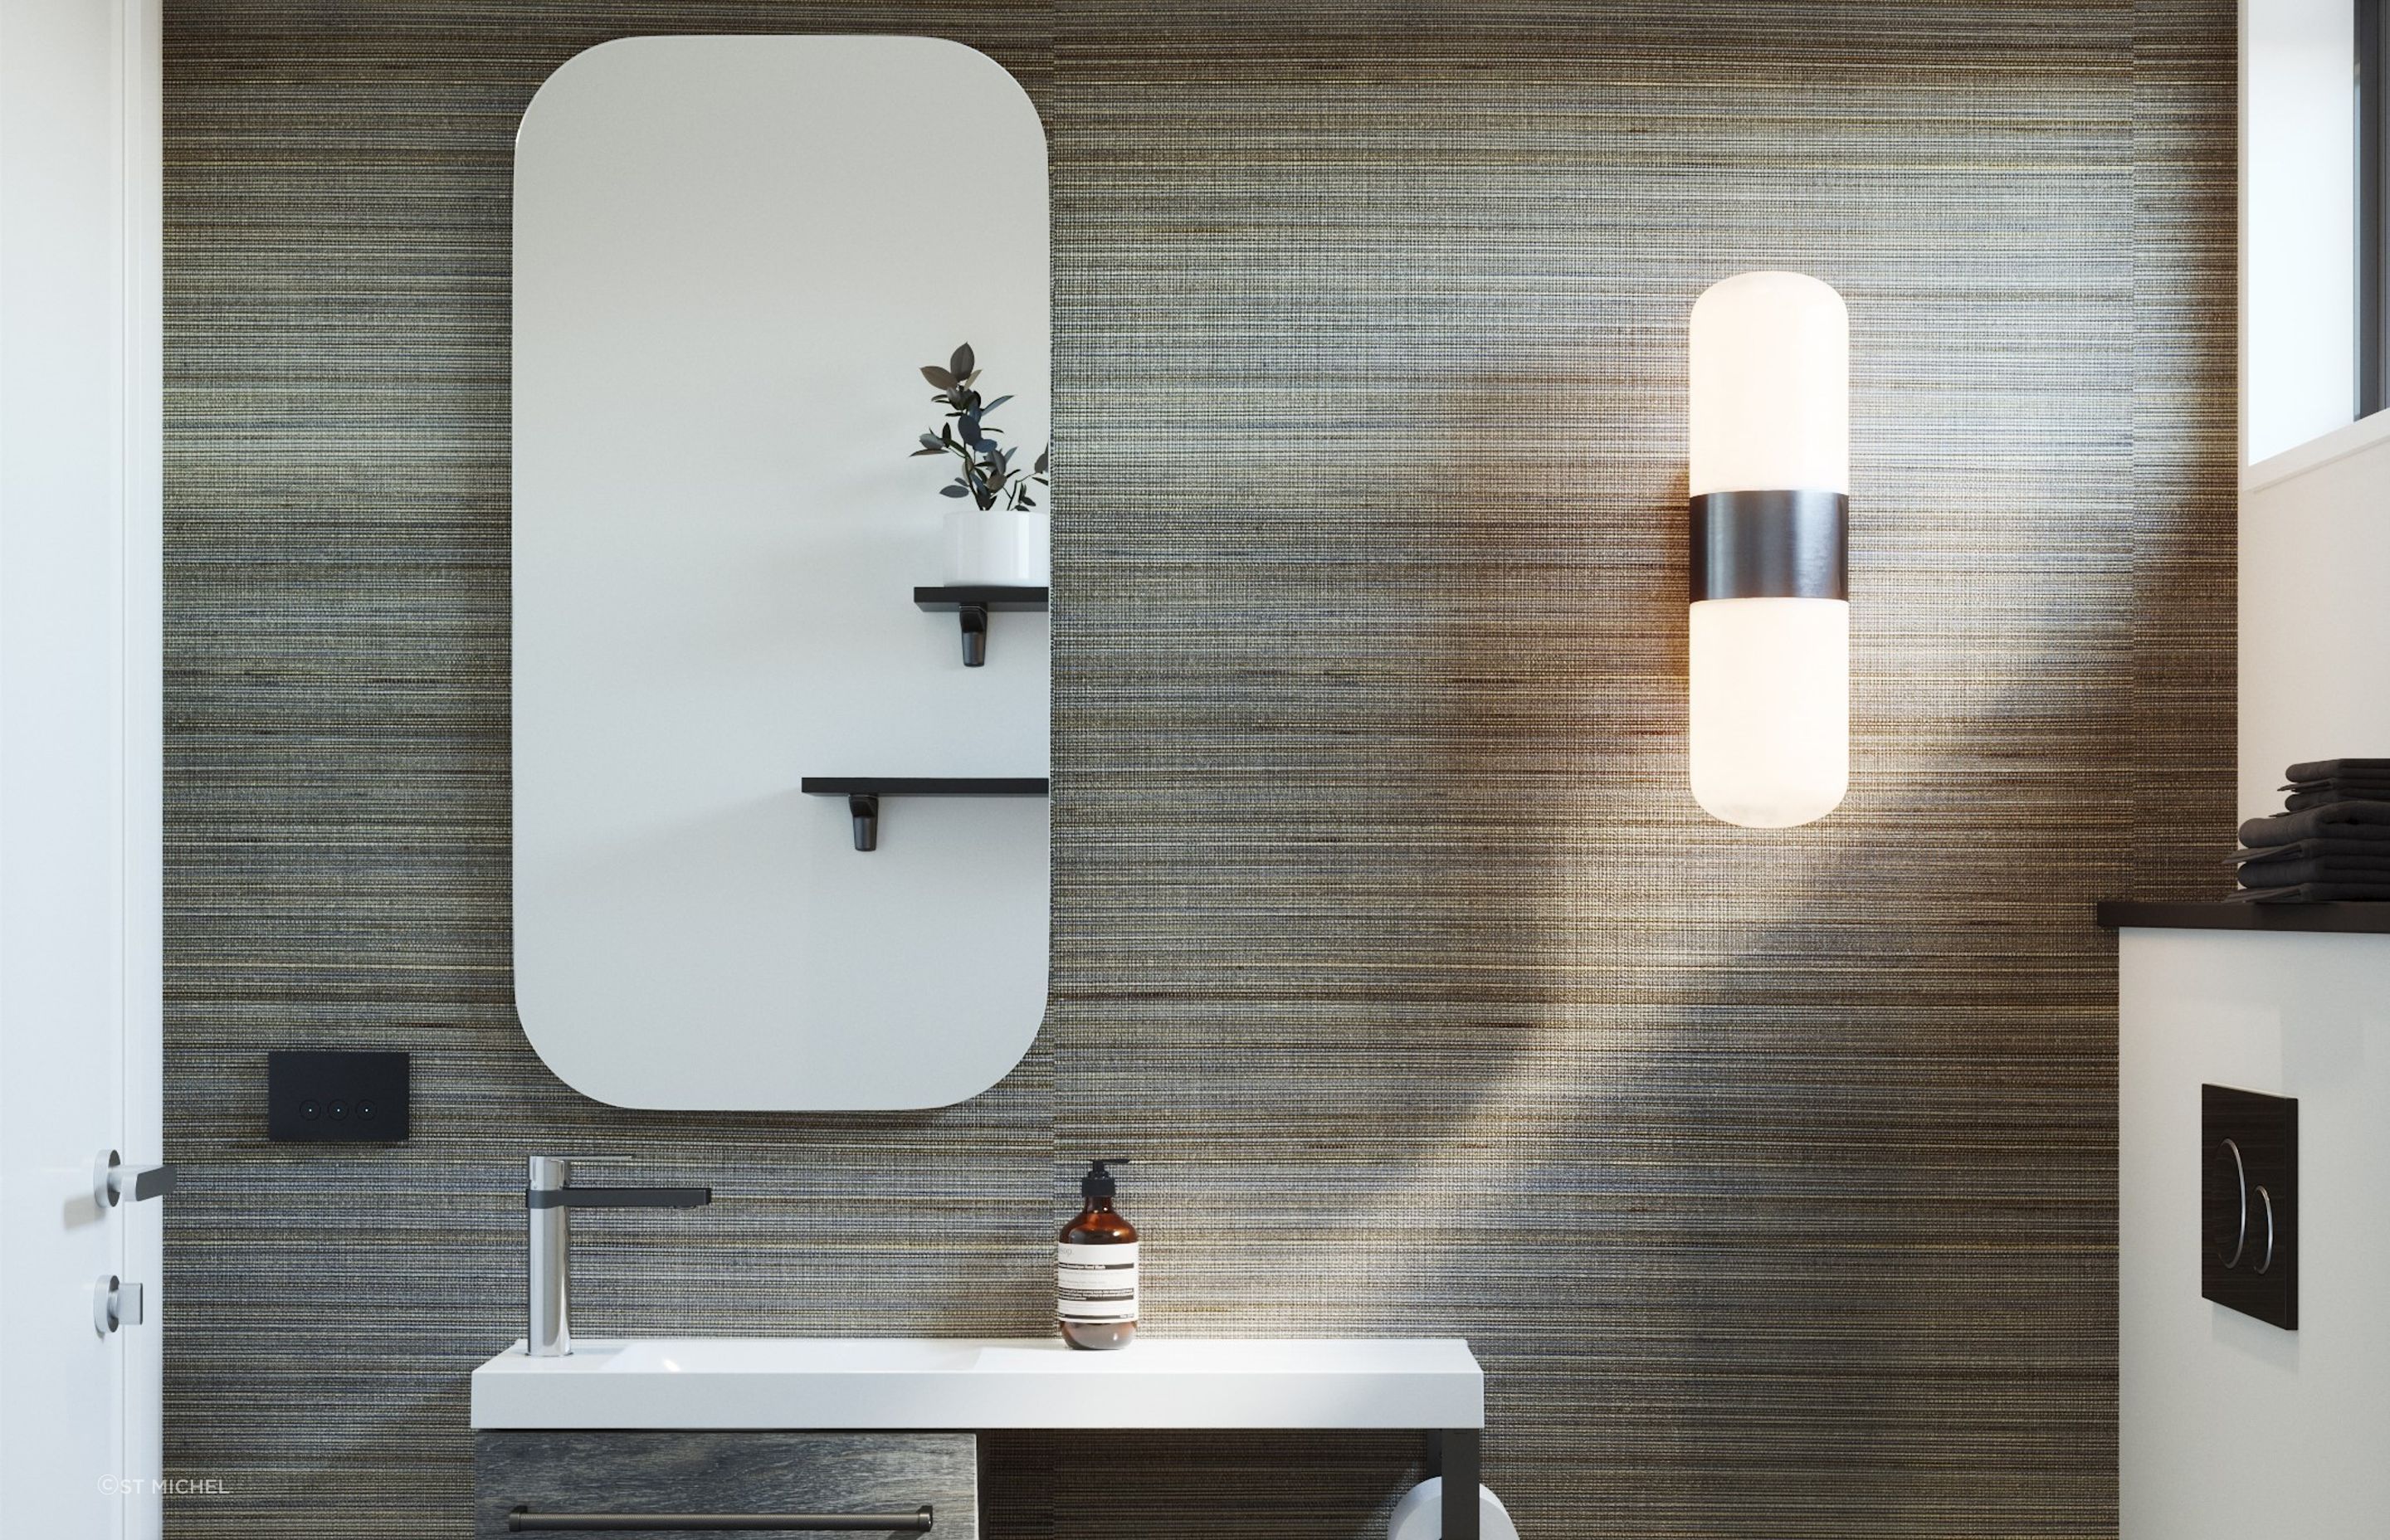 A stylish bathroom mirror like this Solo Stadium Mirror is a great asset to have.